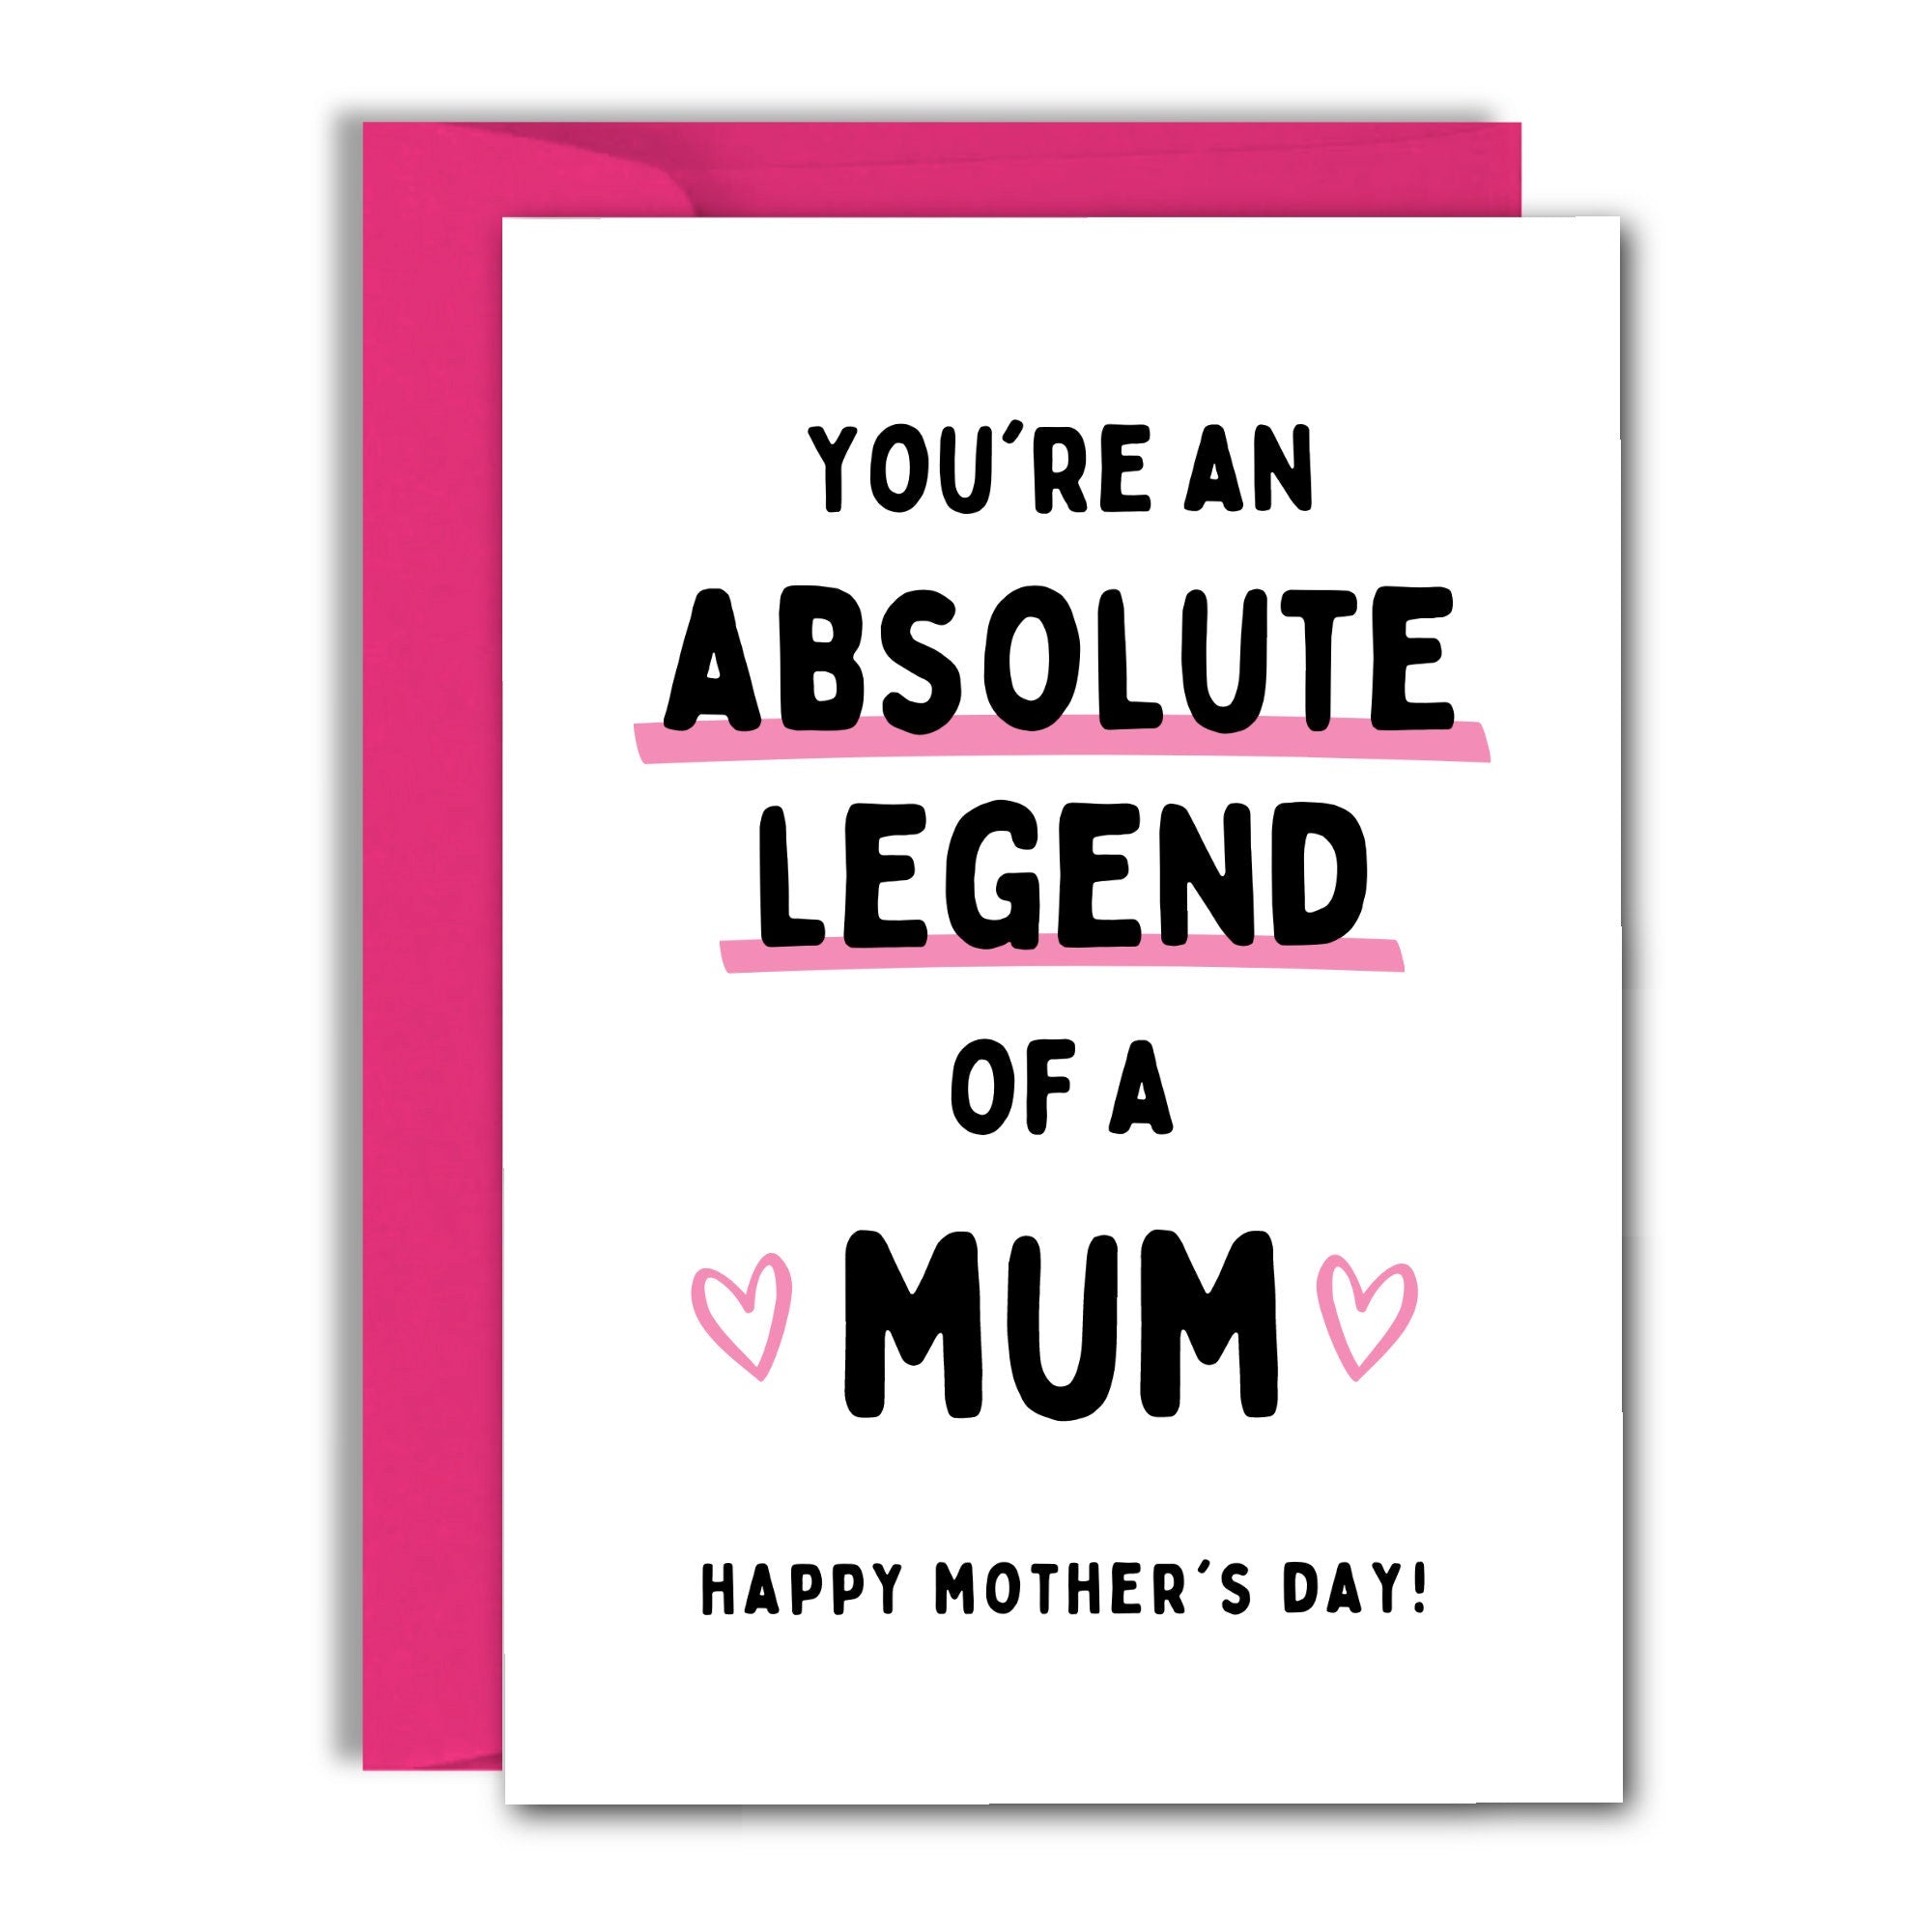 Funny Mothers Day Card, Mother's Day Card, You're An Absolute Legend of a MUM